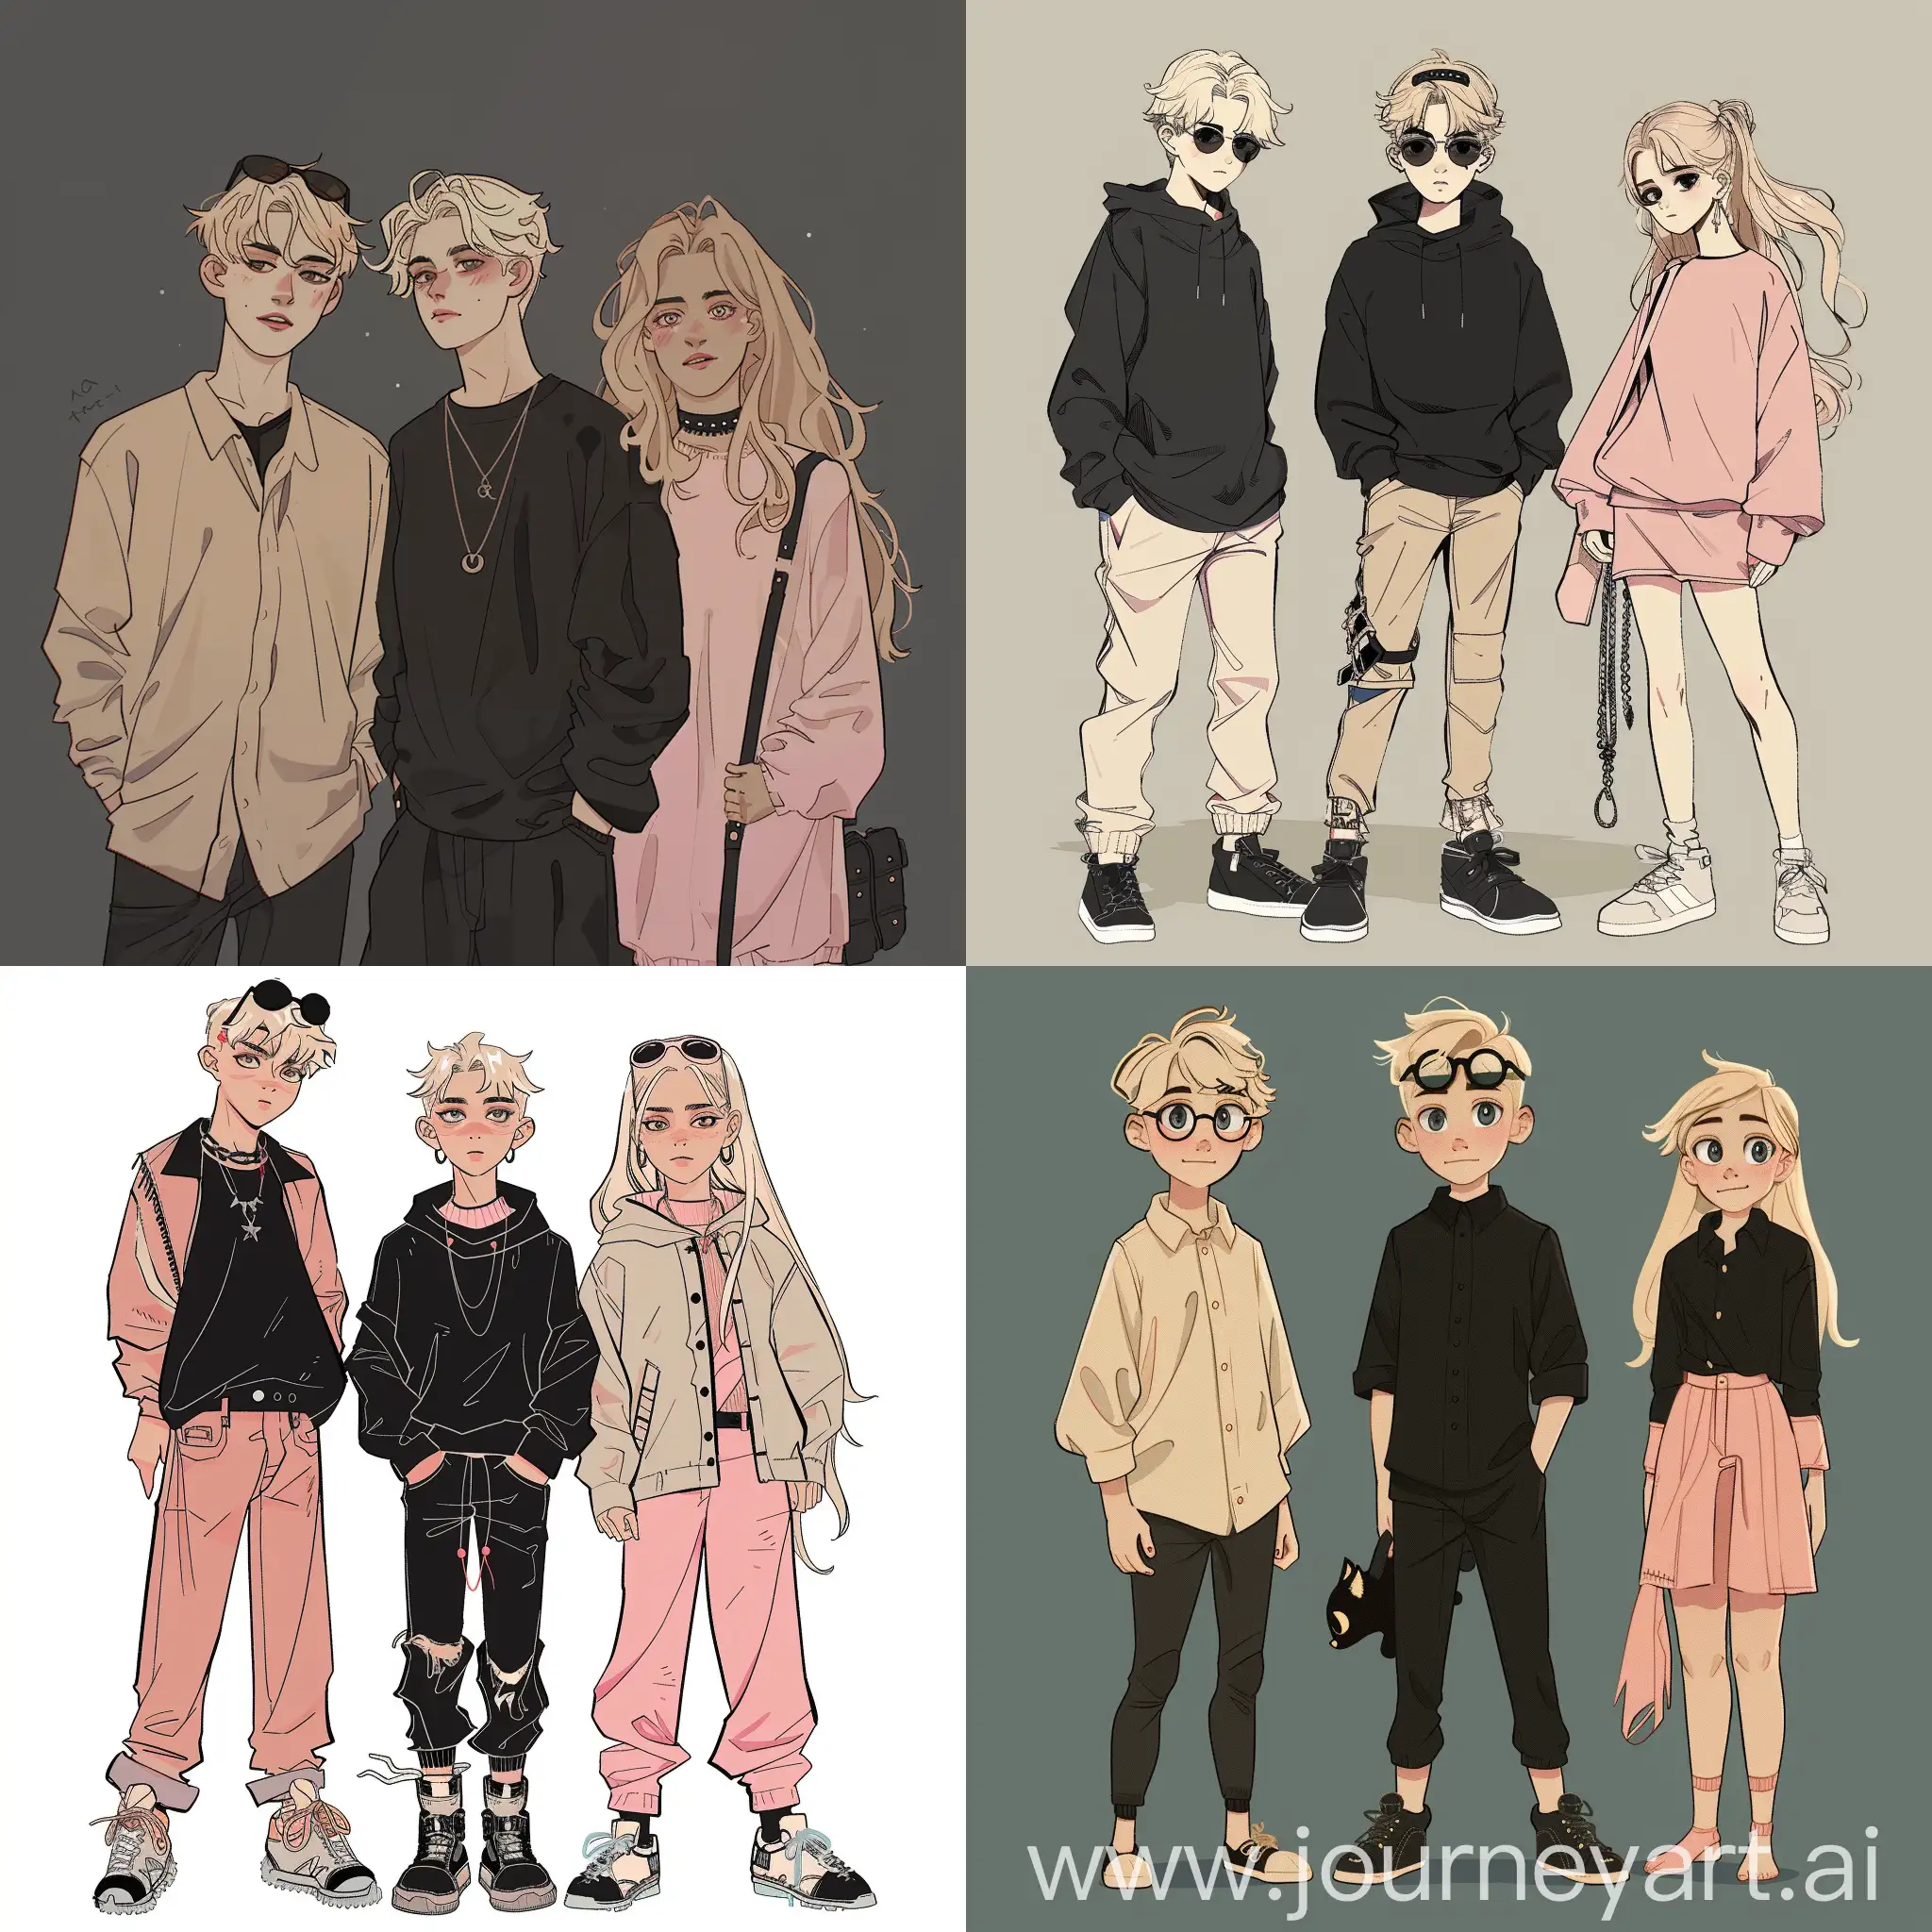 Three-Blonde-Teenagers-in-Dark-Themed-Animated-Drawing